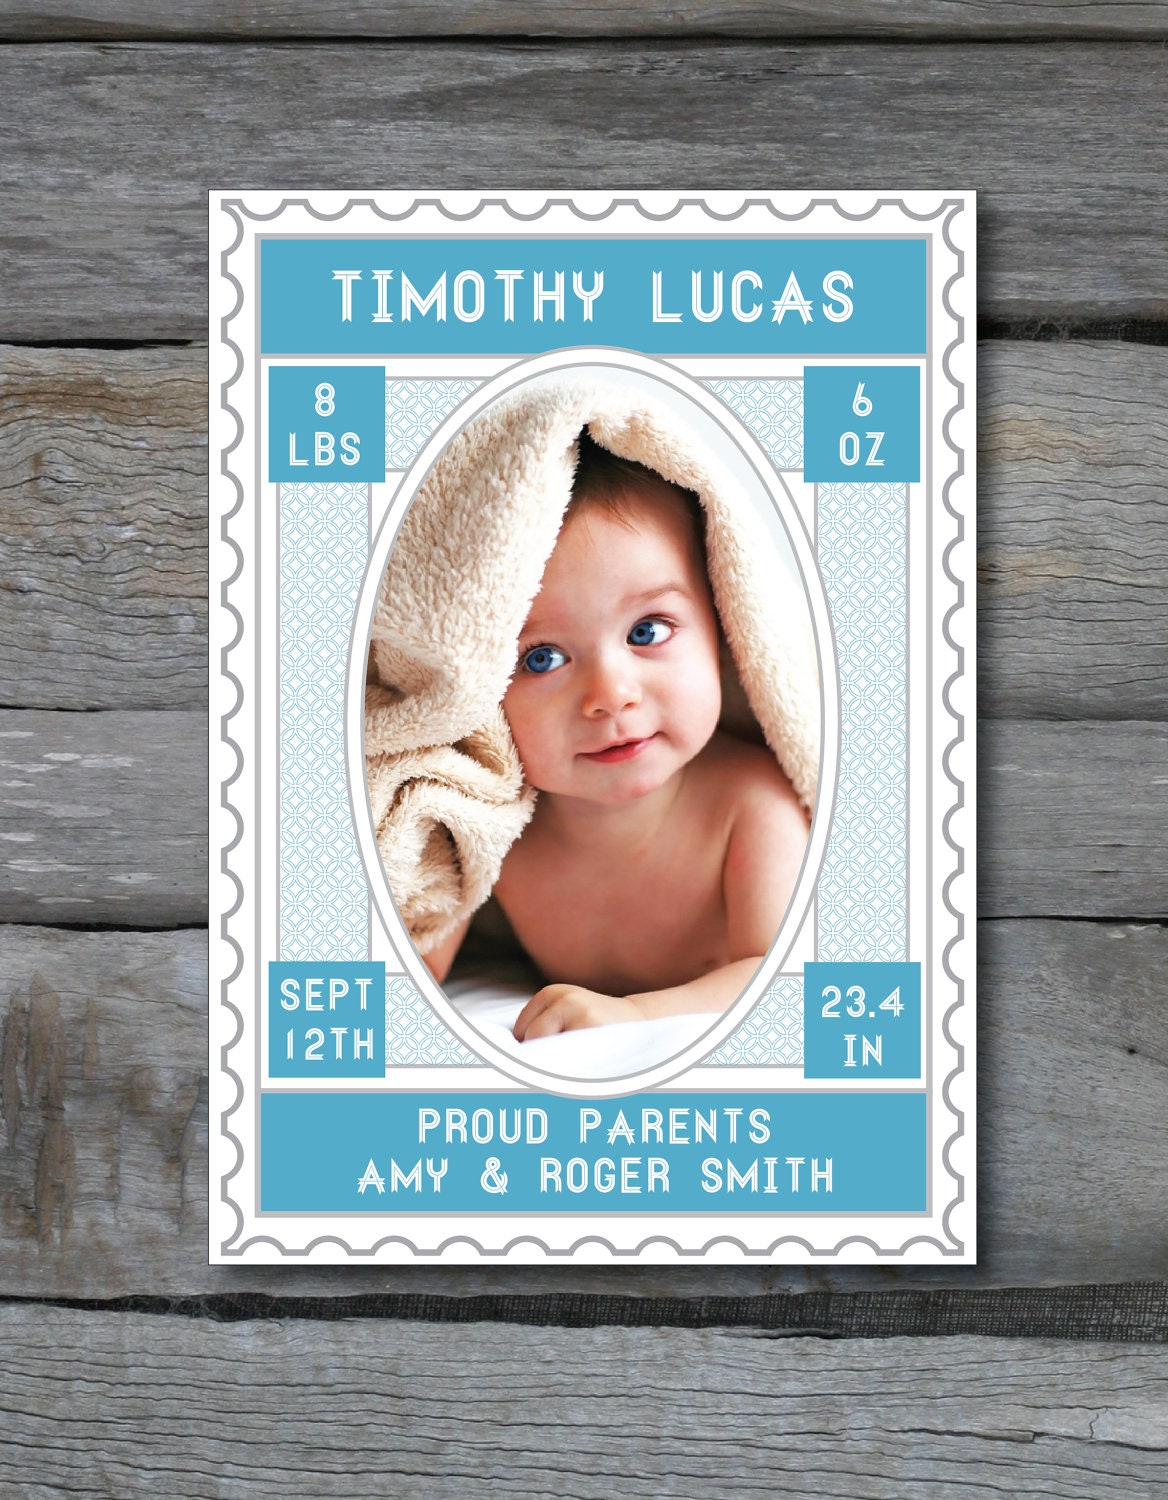 Vintage Stamp Inspired Birth Announcement PHOTO CARD in Pink Blue Coral and Navy - Digital File